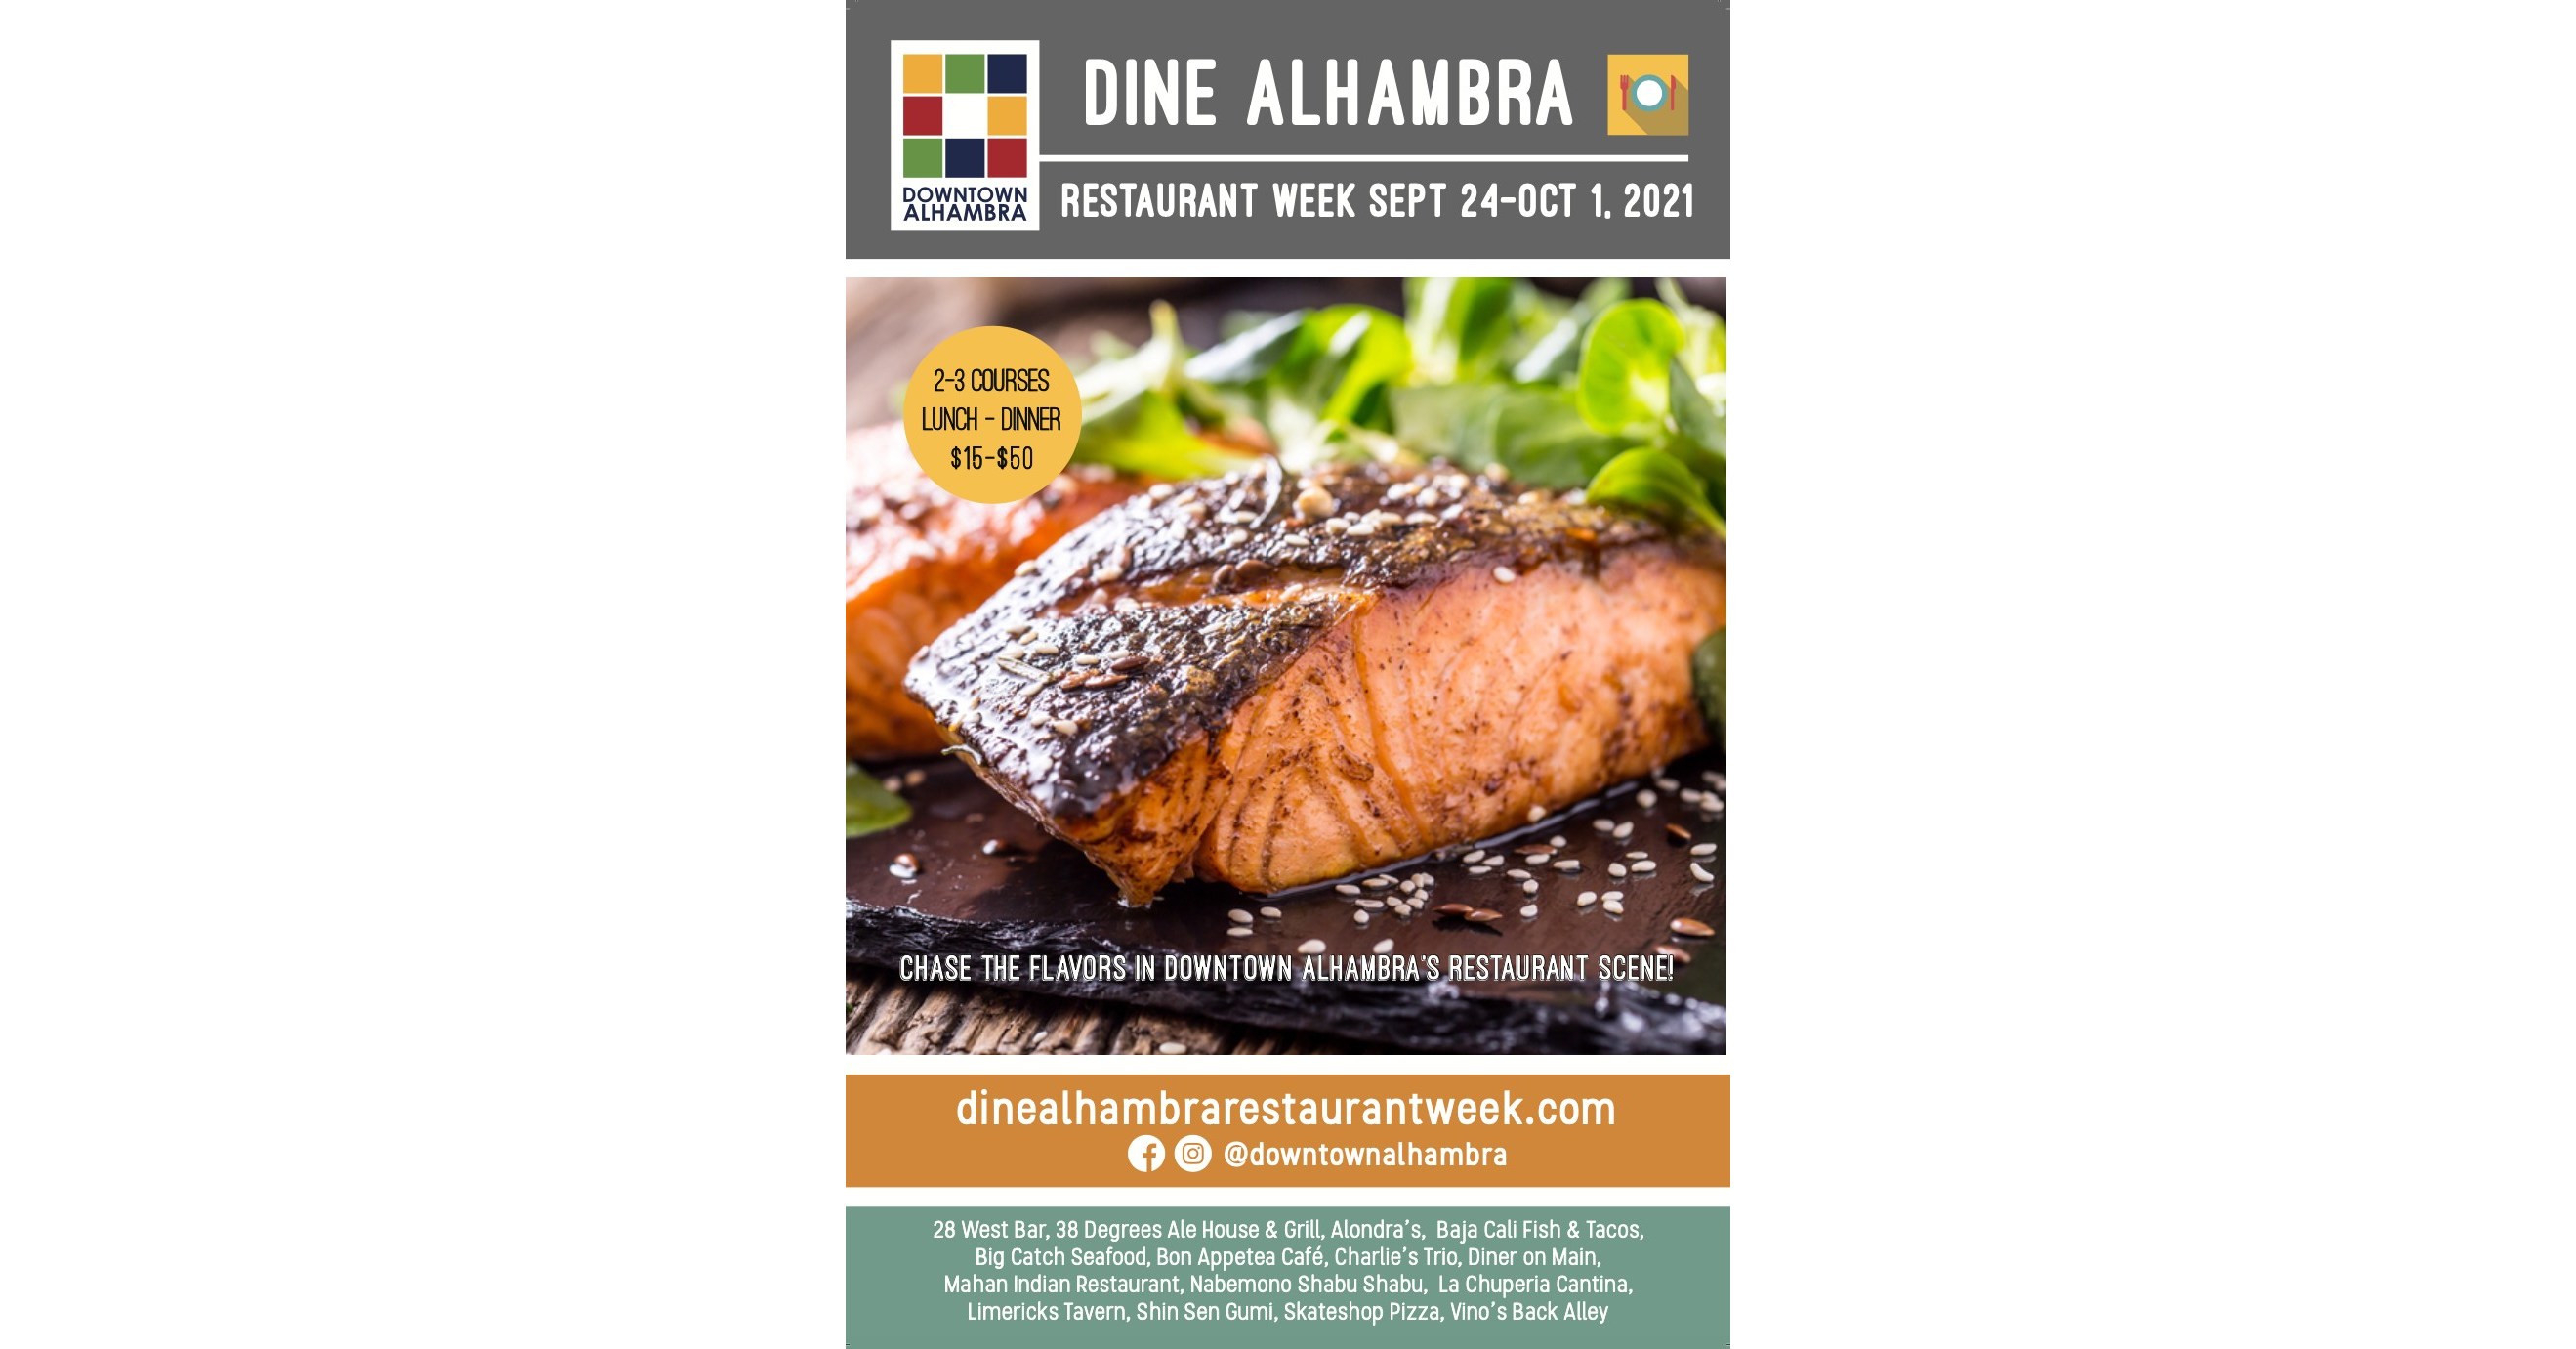 Dine Alhambra Restaurant Week Returns With Delicious Lineup (Sept. 24-Oct. 1, 2021)